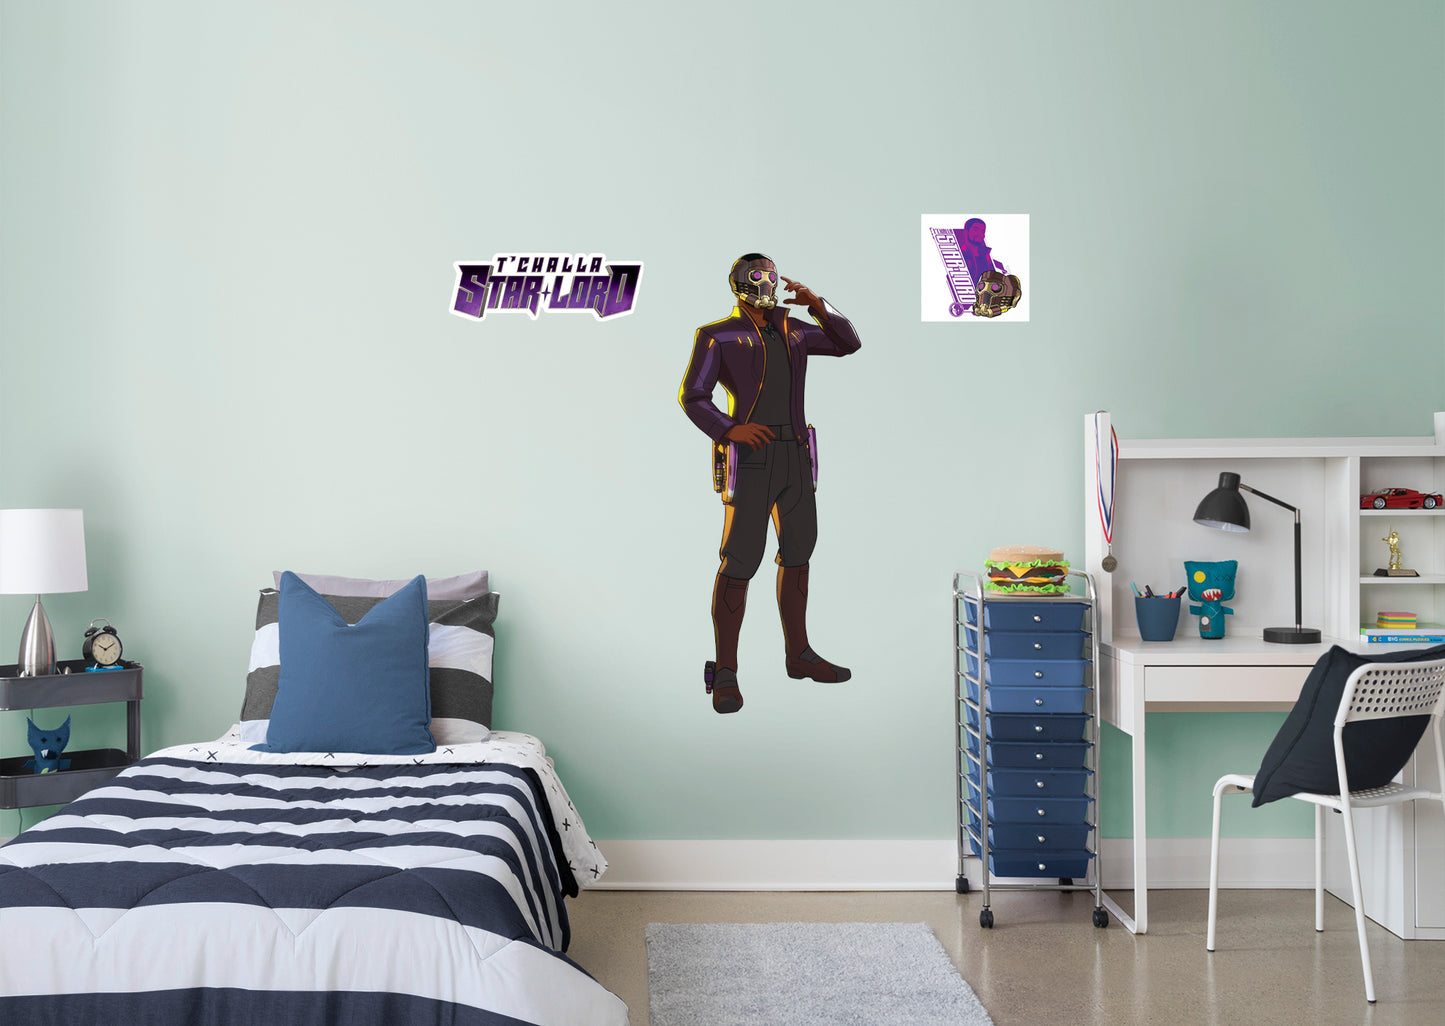 What If...: T'Challa Star-Lord RealBig        - Officially Licensed Marvel Removable Wall   Adhesive Decal